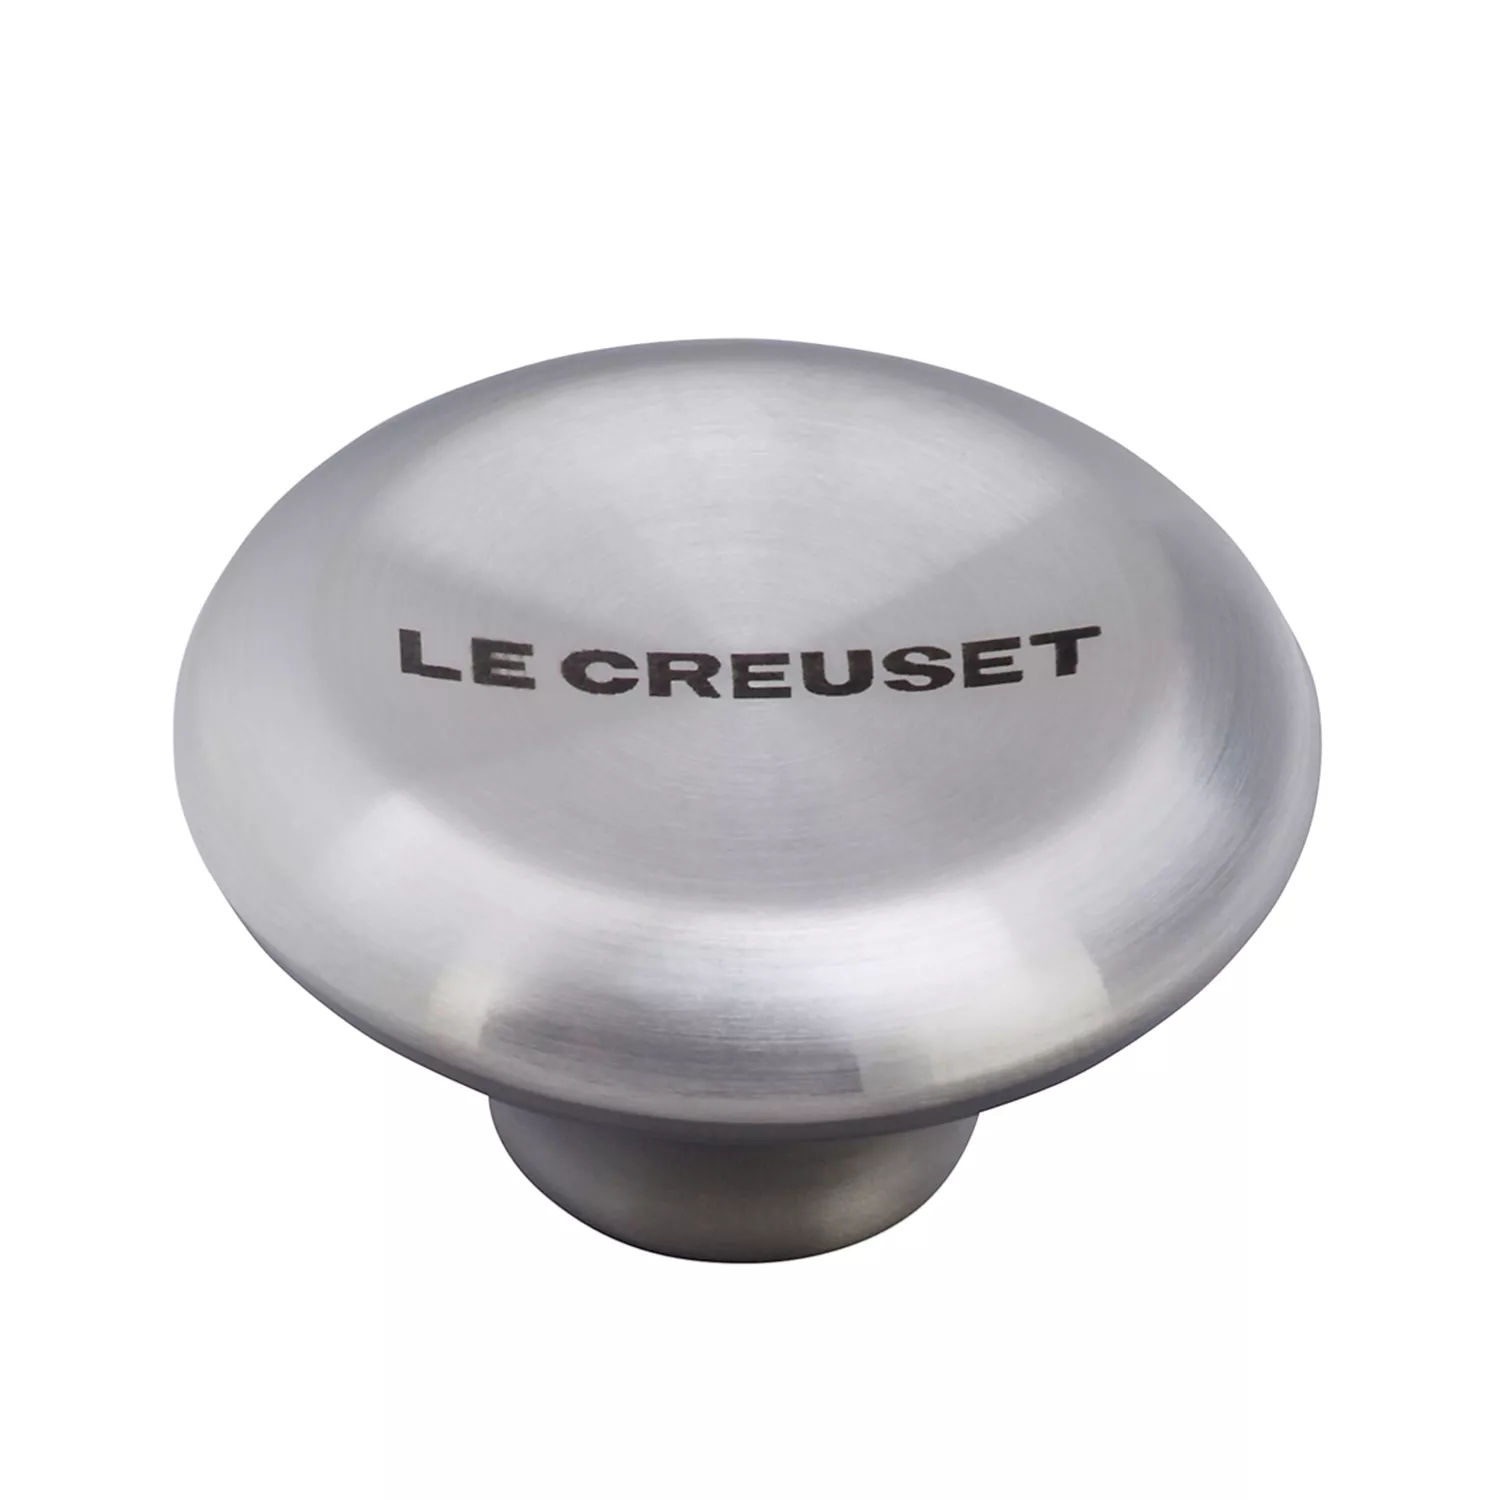 Le Creuset Stainless Steel Signature Replacement Knob